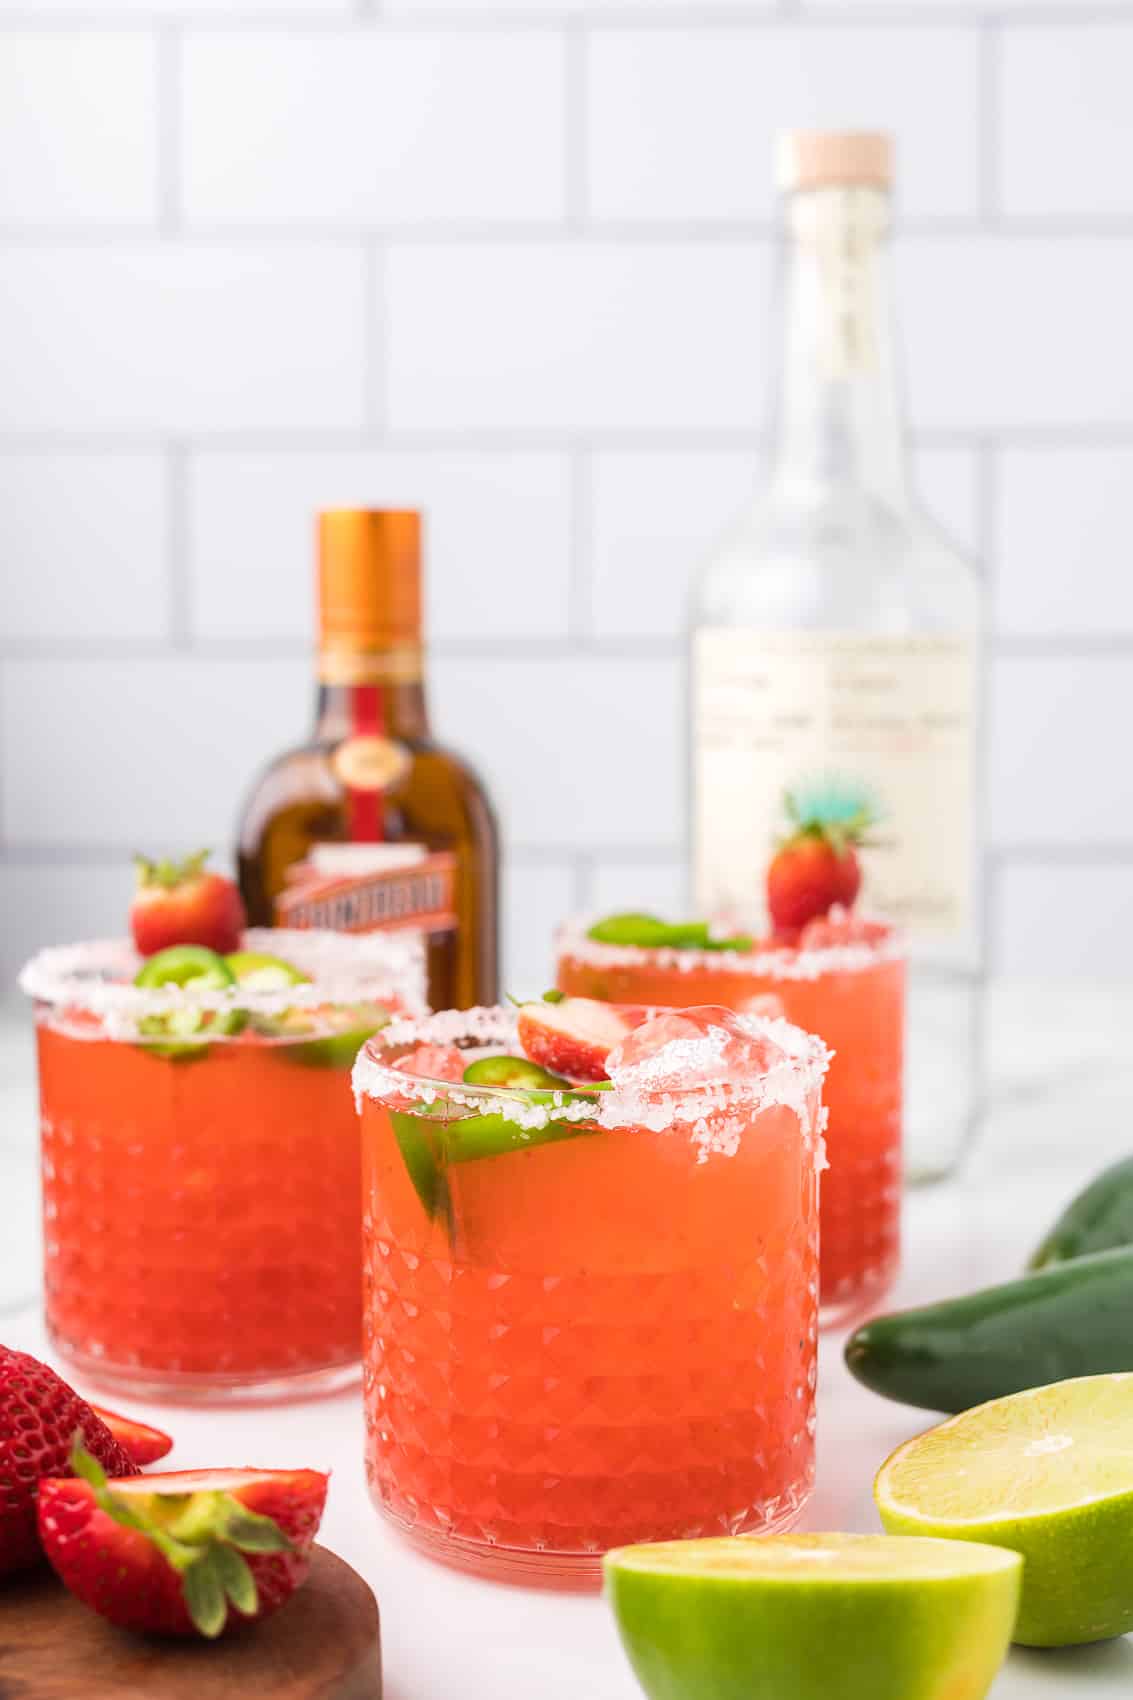 Strawberry Jalapeno Margarita with strawberries, lime and jalapeno as garnish.